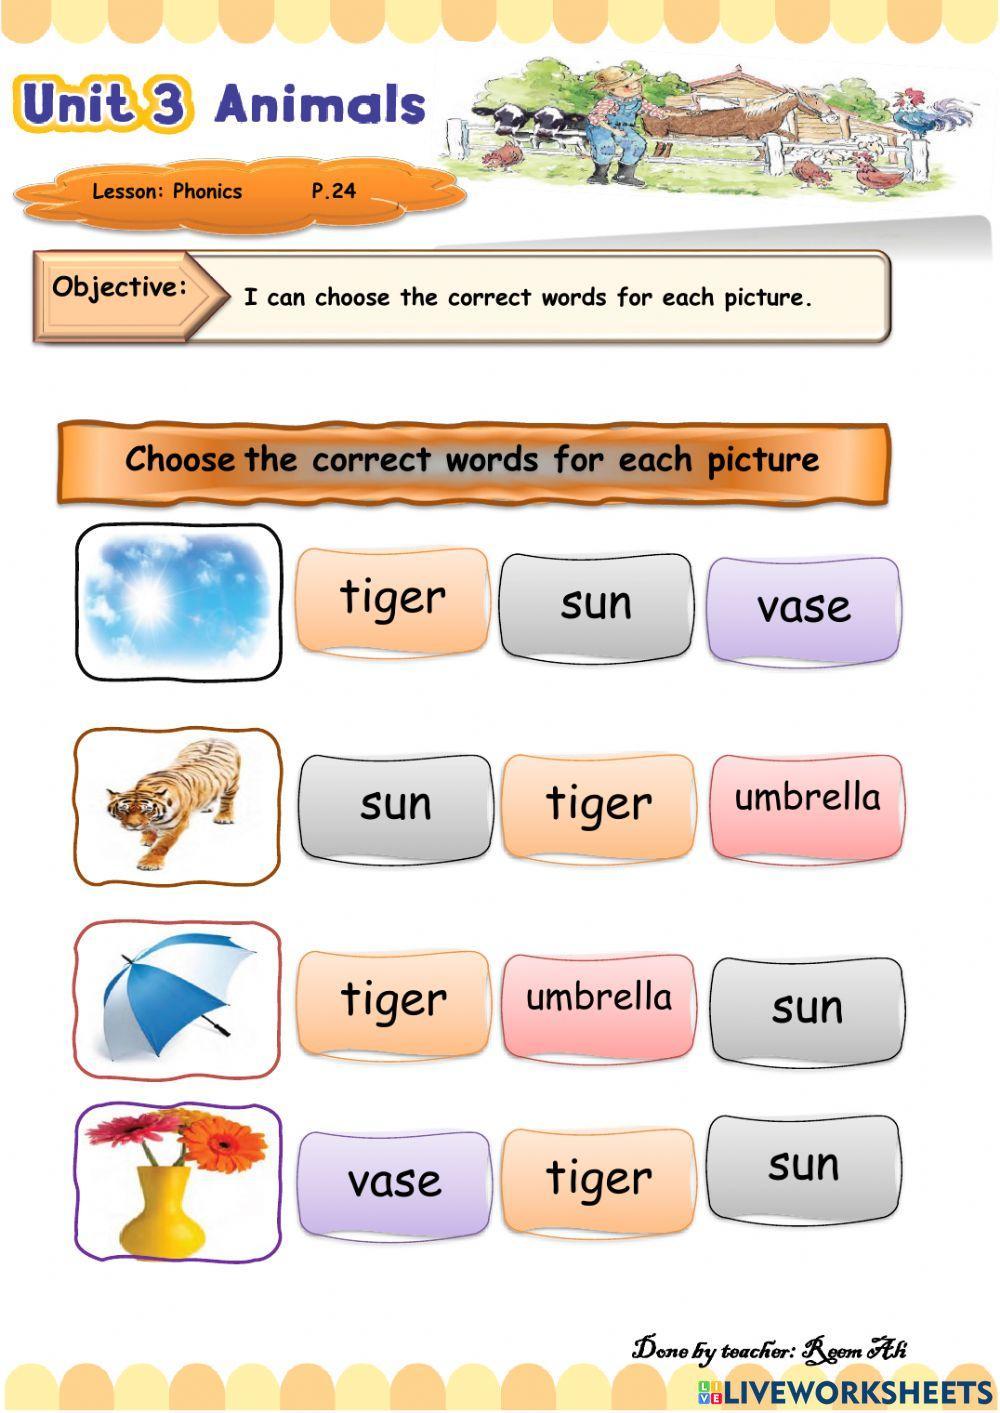 We Can2 U3 L4:  I can choose the correct words for each picture.